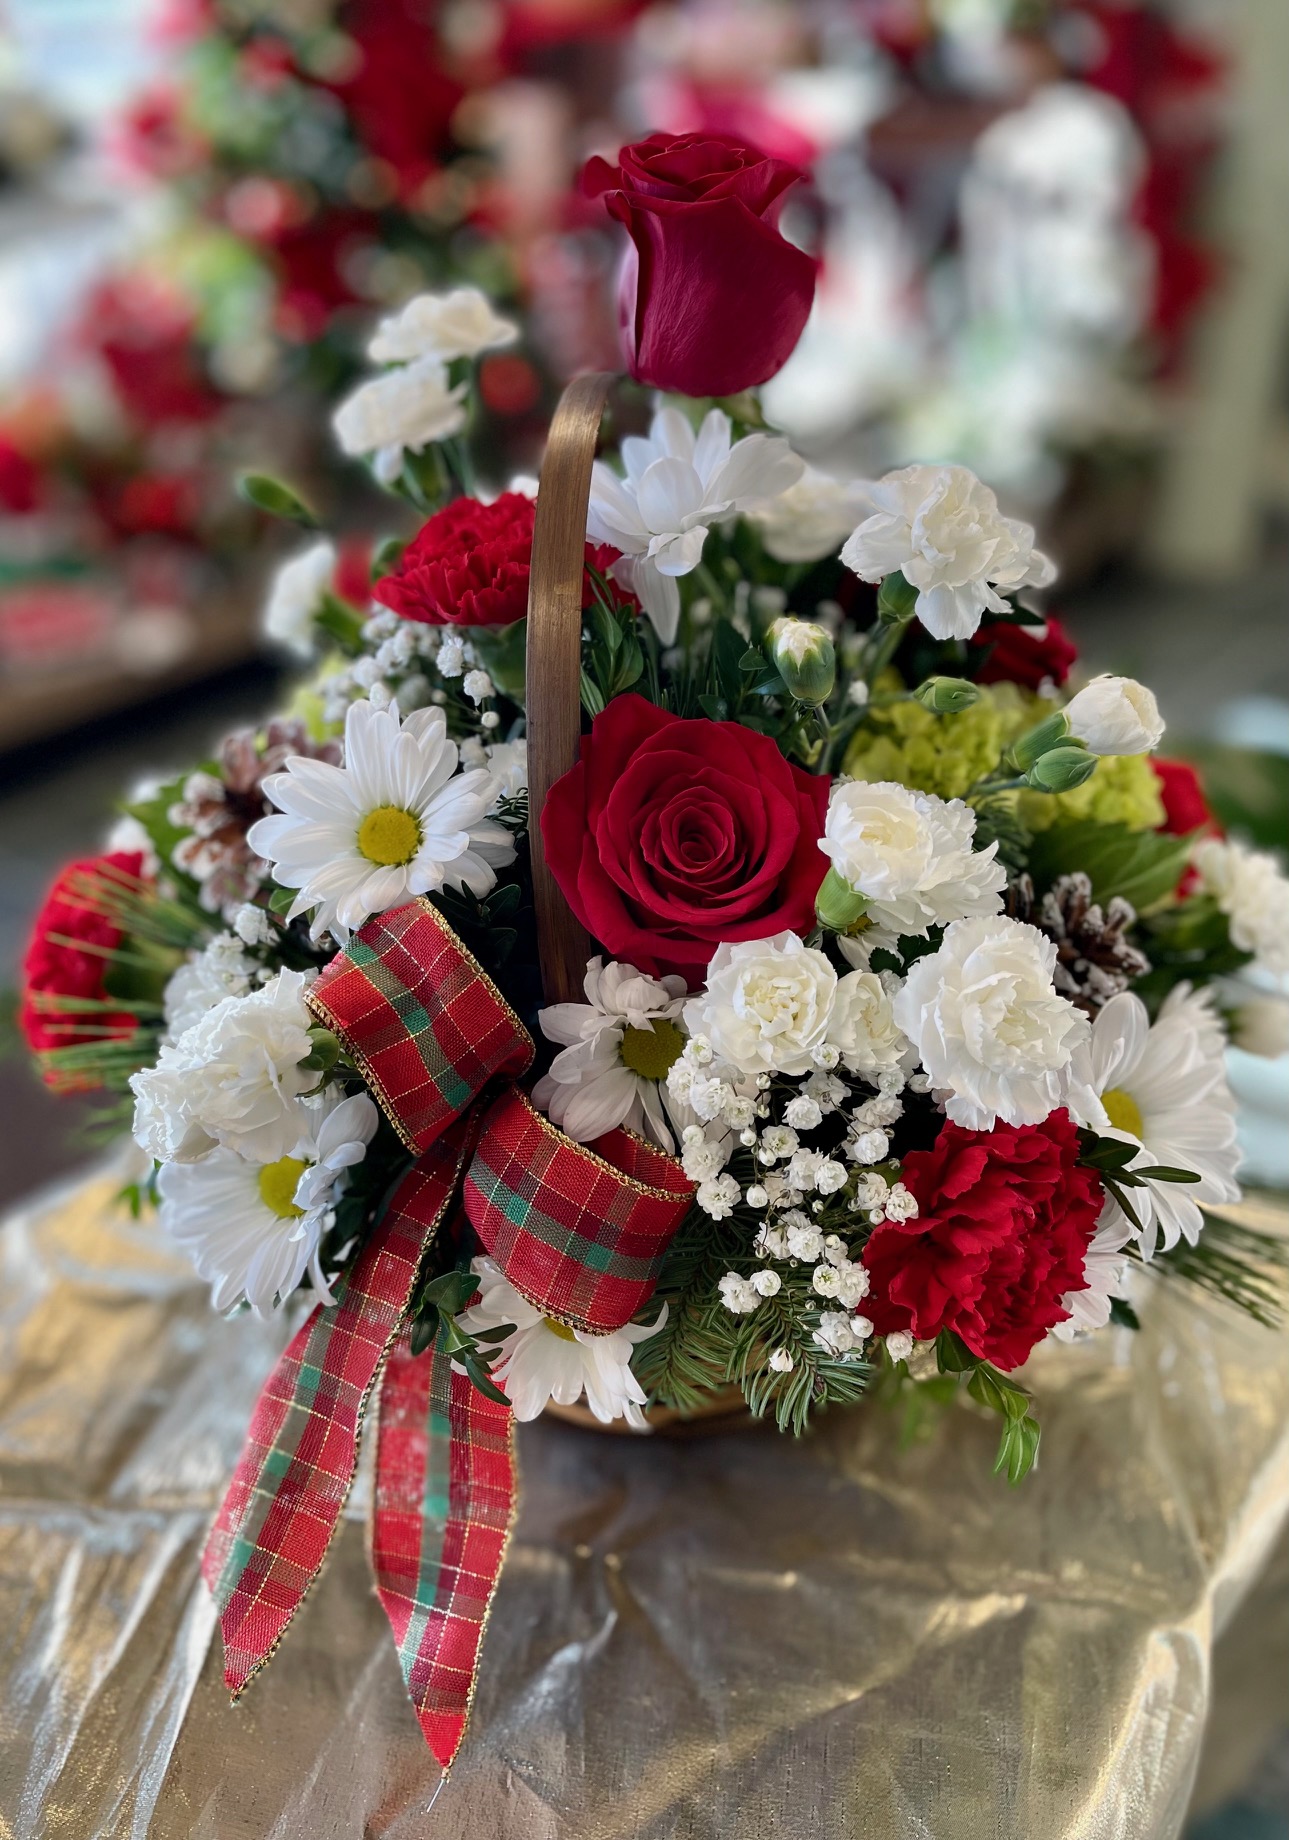 Christmas Special - Beautiful basket filled with seasonal flowers sure to bring holiday joy